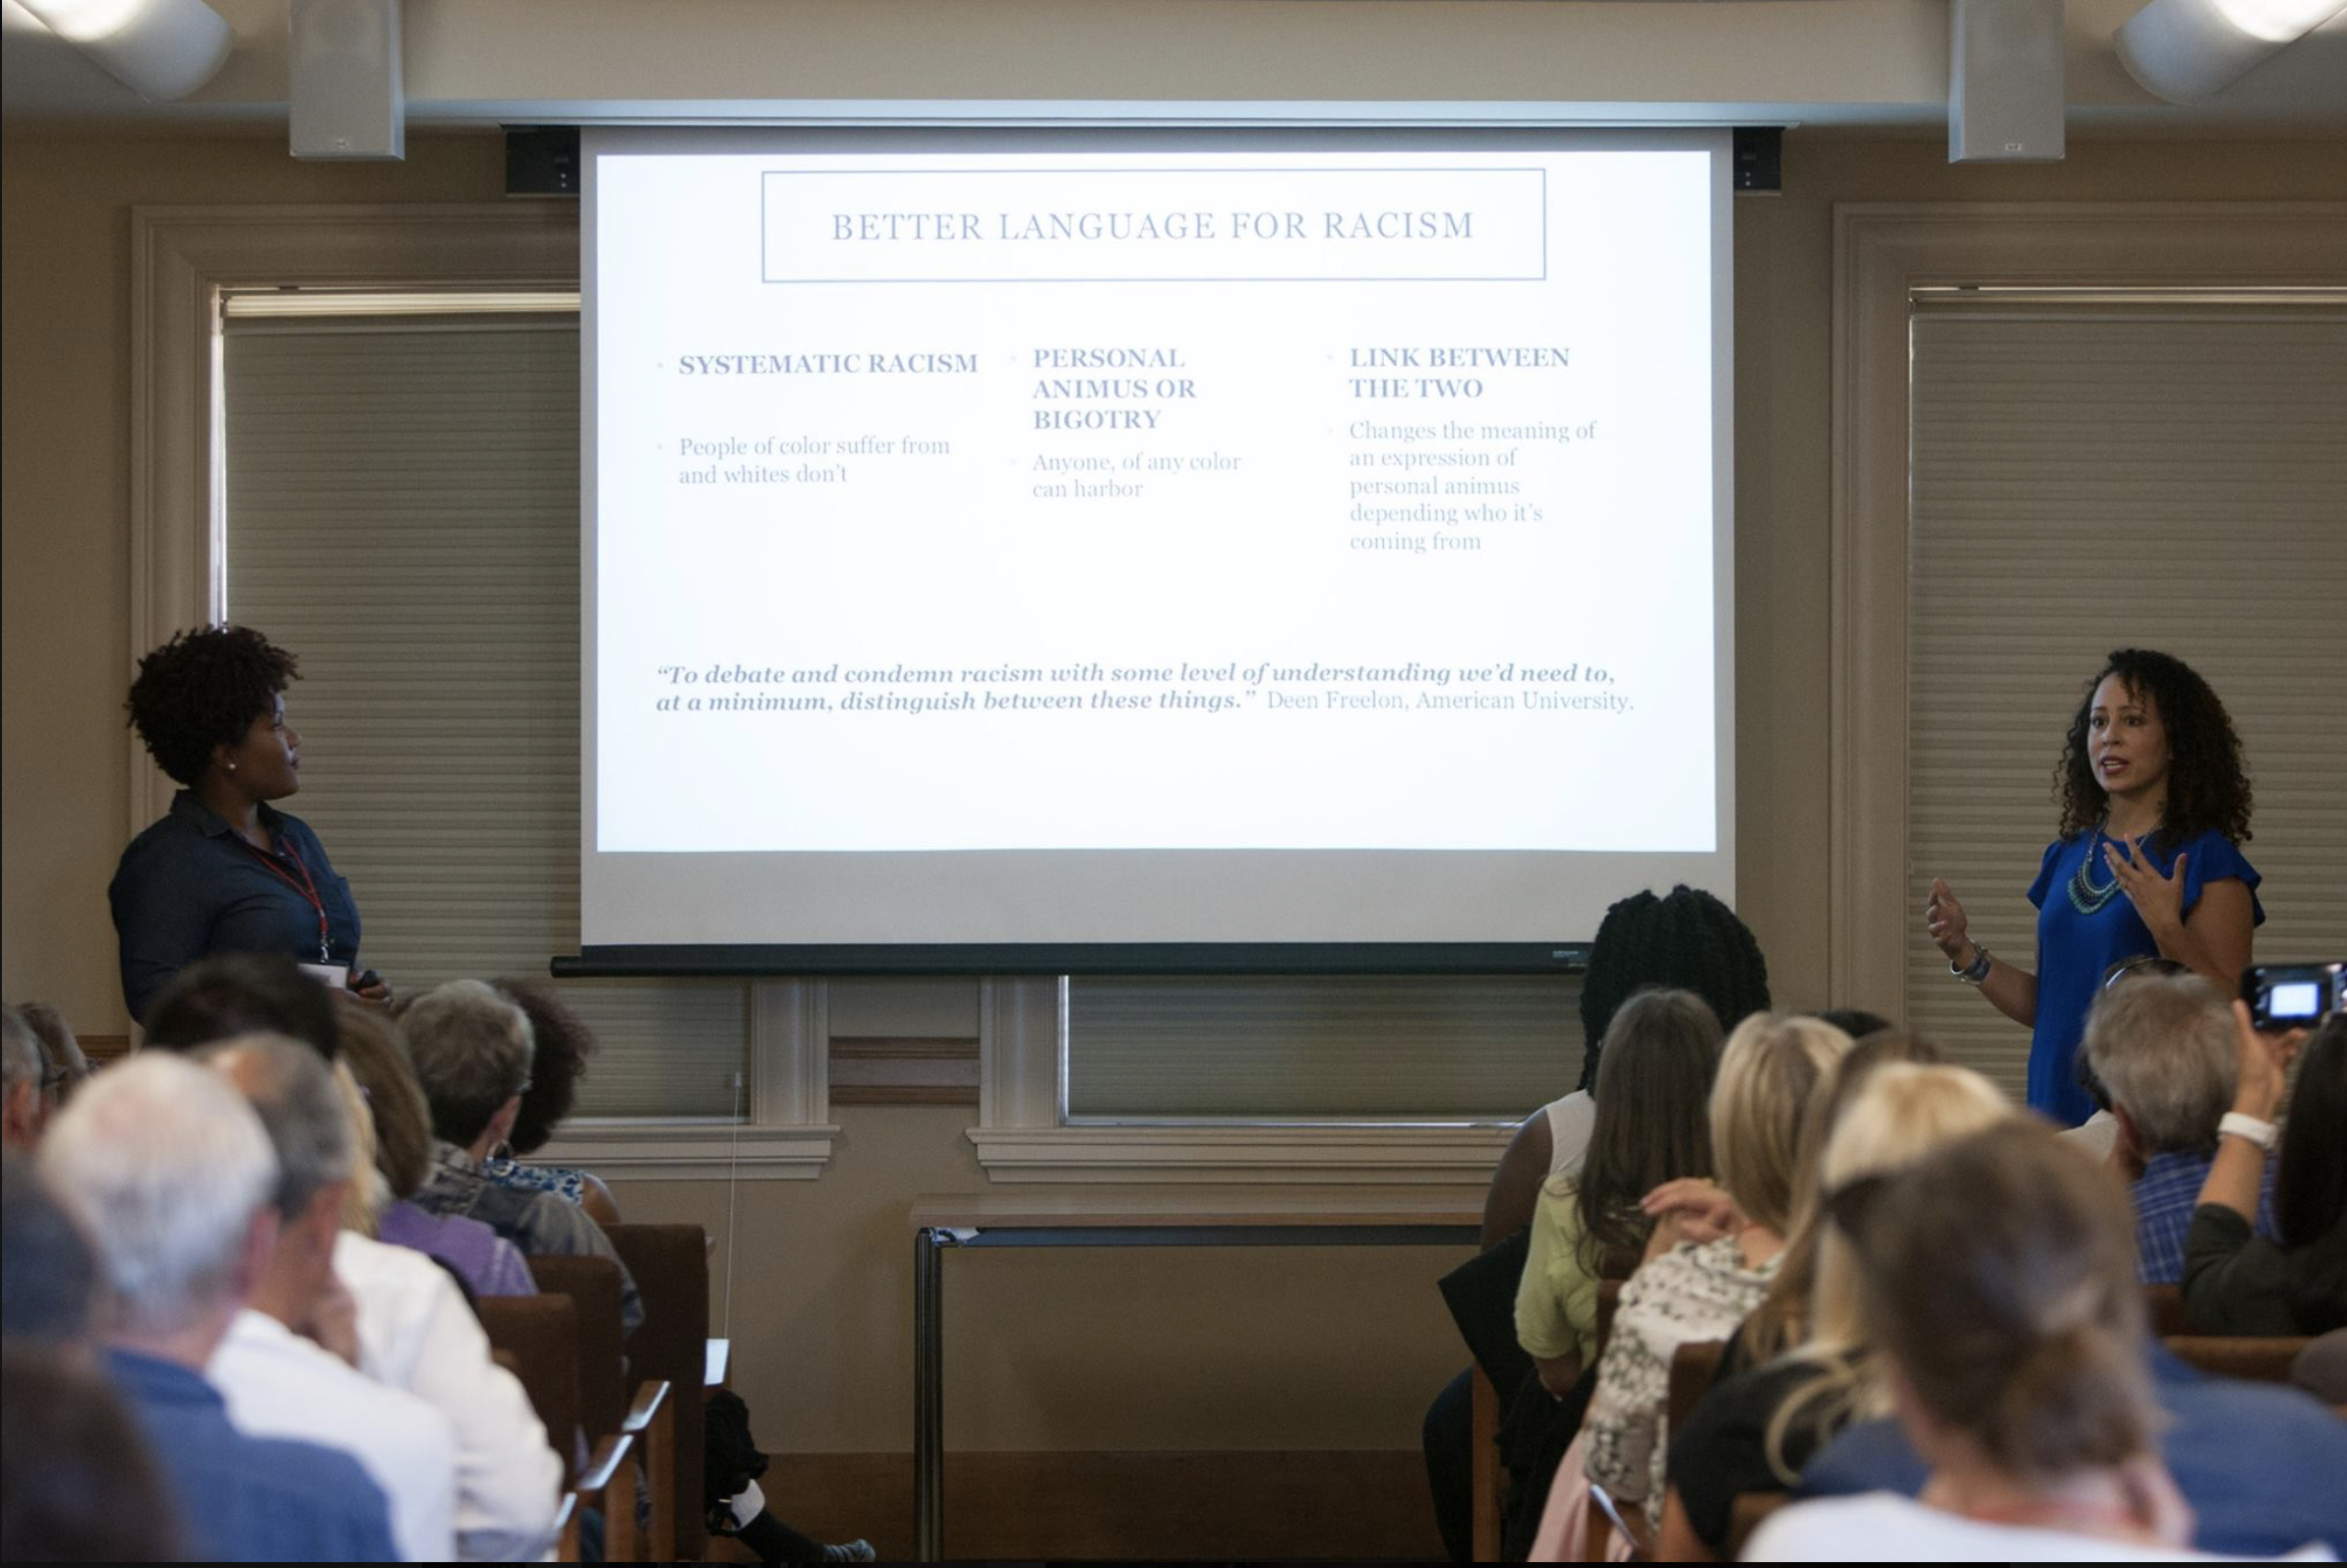 While a Knight Journalism Fellow at Stanford, Tonya Mosley (left) helped create an interactive implicit bias workshop for journalists, which she leads with fellow Knight Fellow Jenée Desmond-Harris. Here, they present their workshop during the John S. Knight 50th Anniversary Gathering in 2016